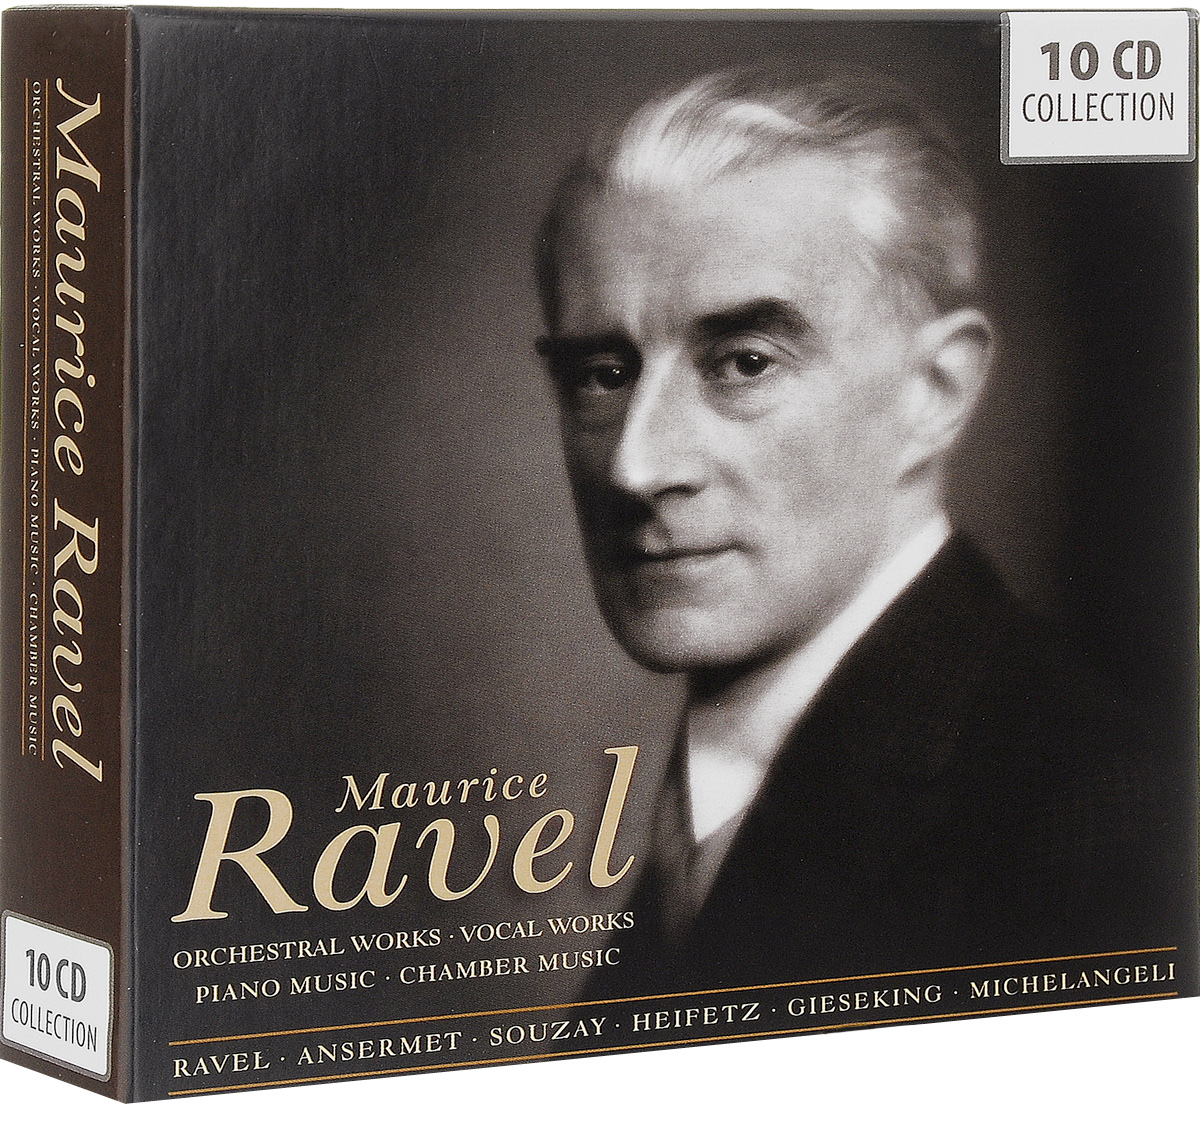 Maurice Ravel. Orchestral Works / Vocal Works / Piano Music / Chamber Music (10 CD)